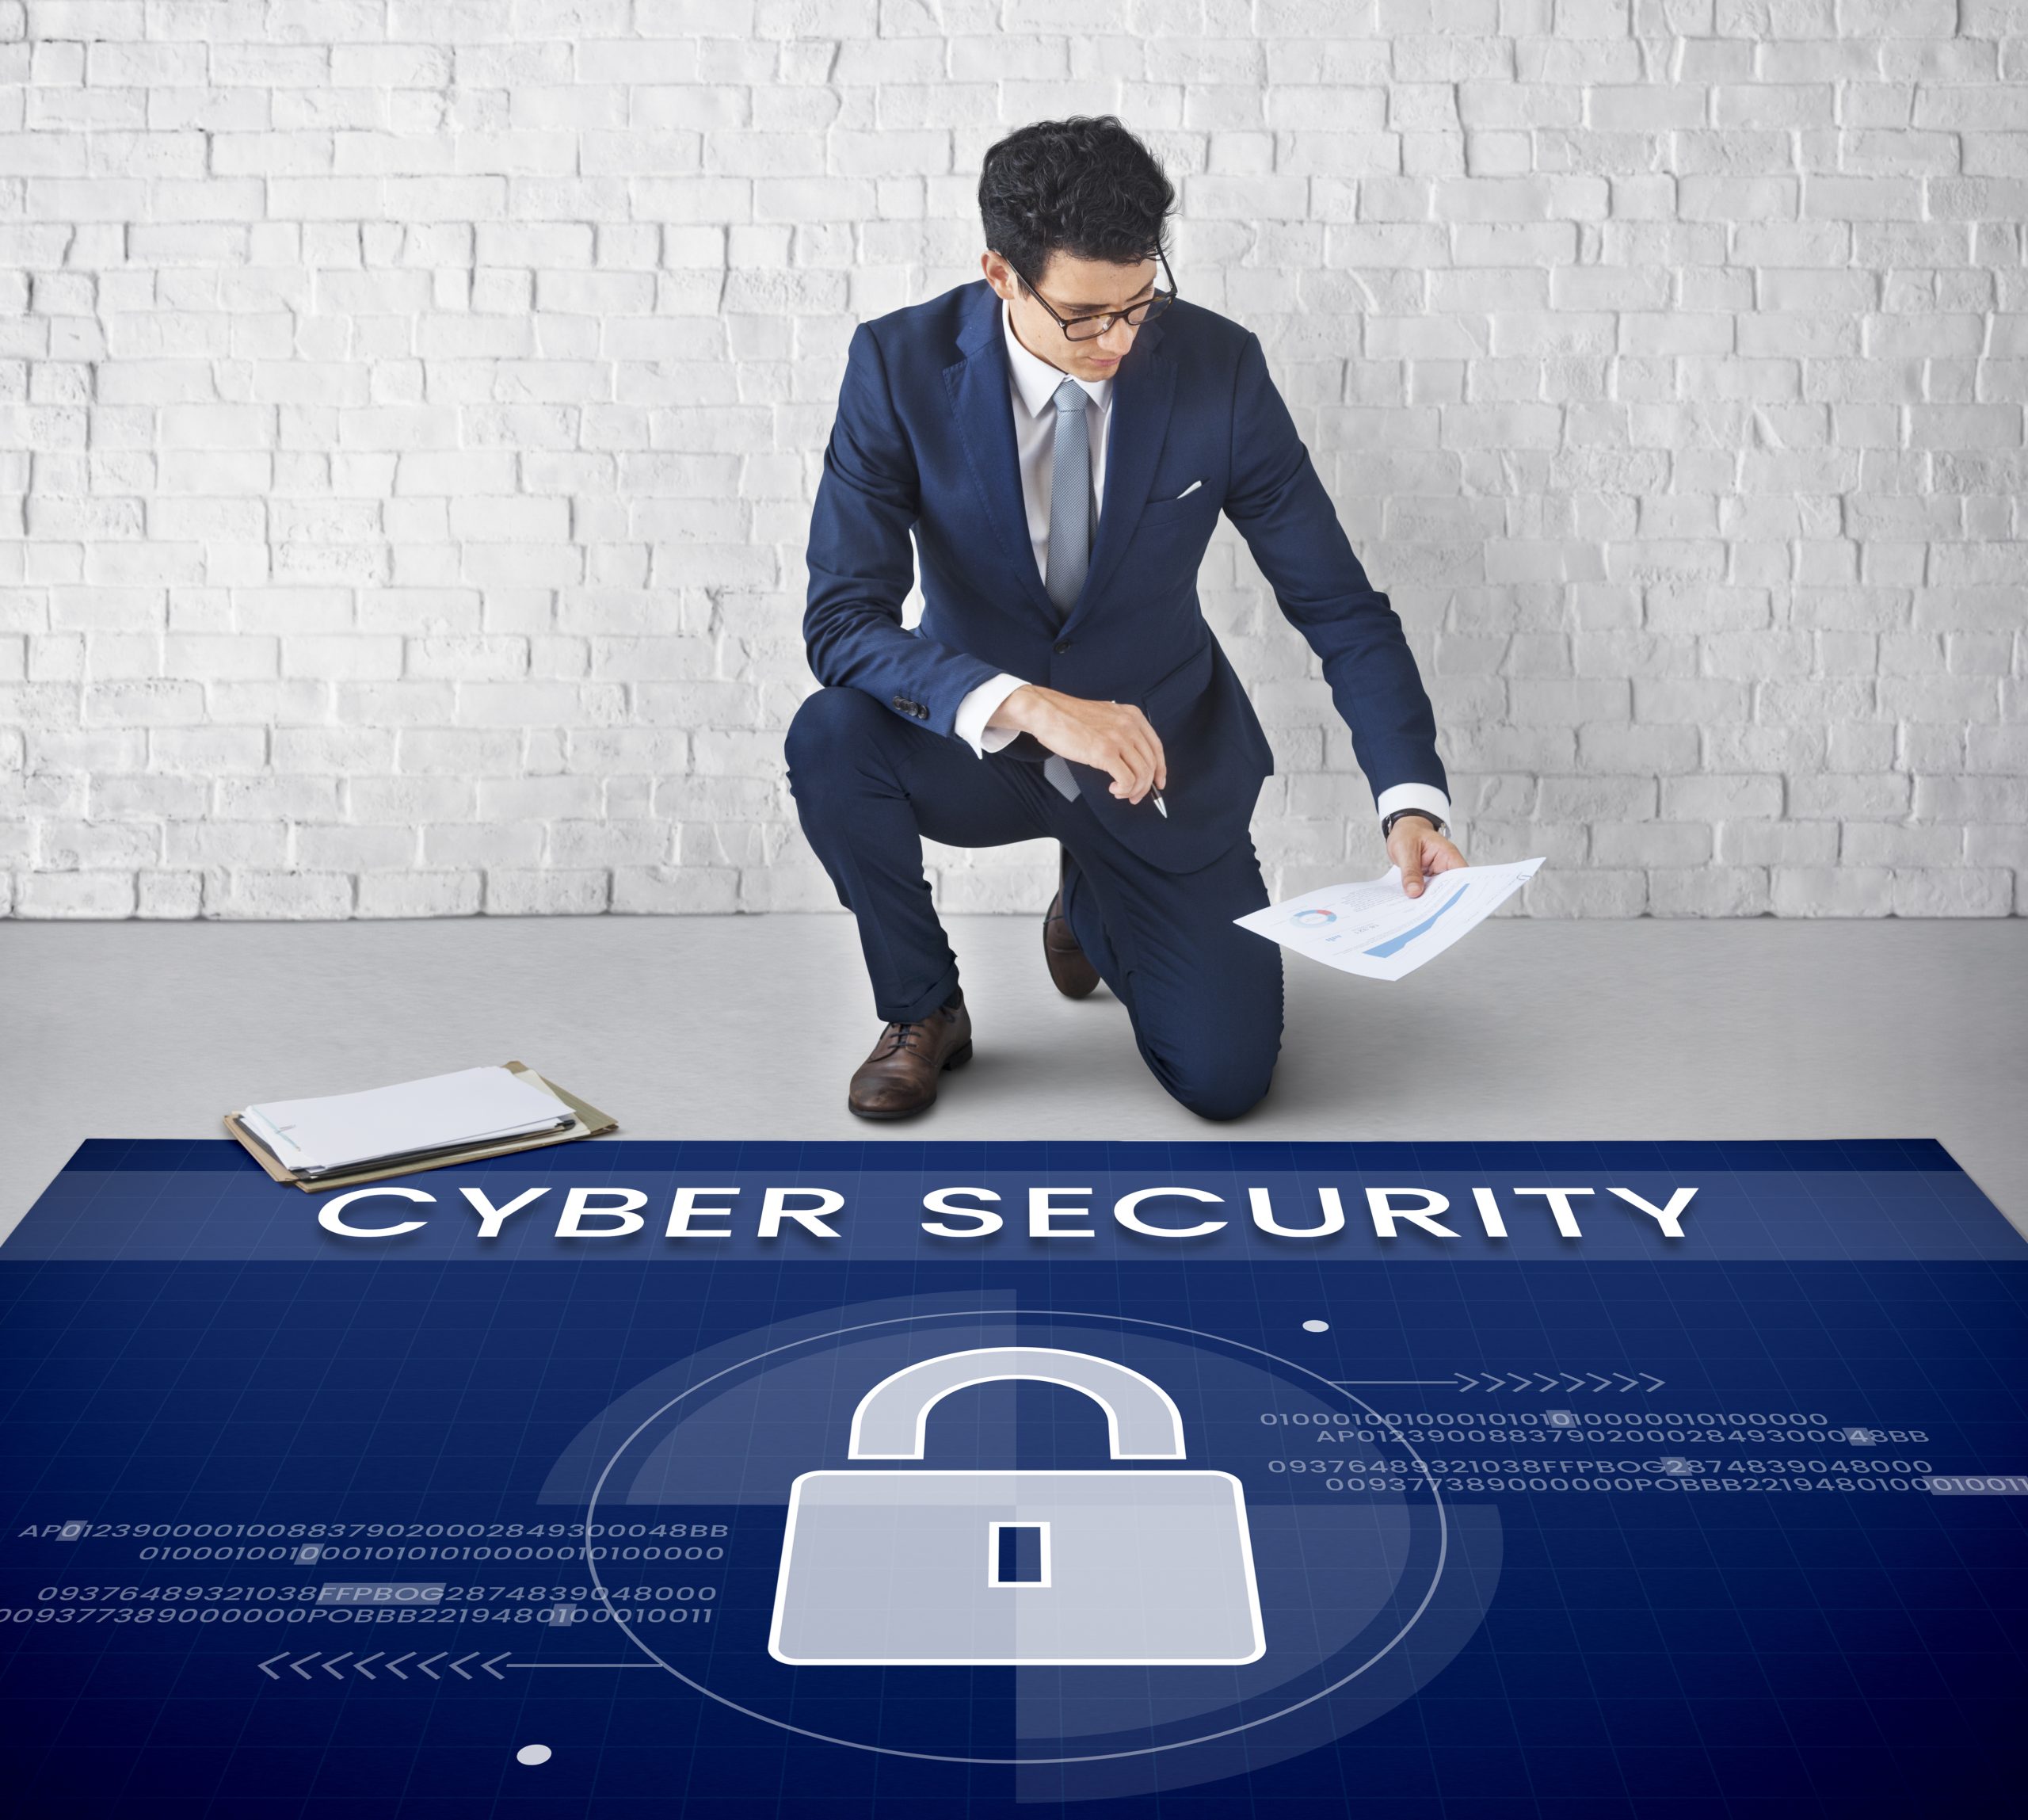 Common cybersecurity threats and how to protect yourself…